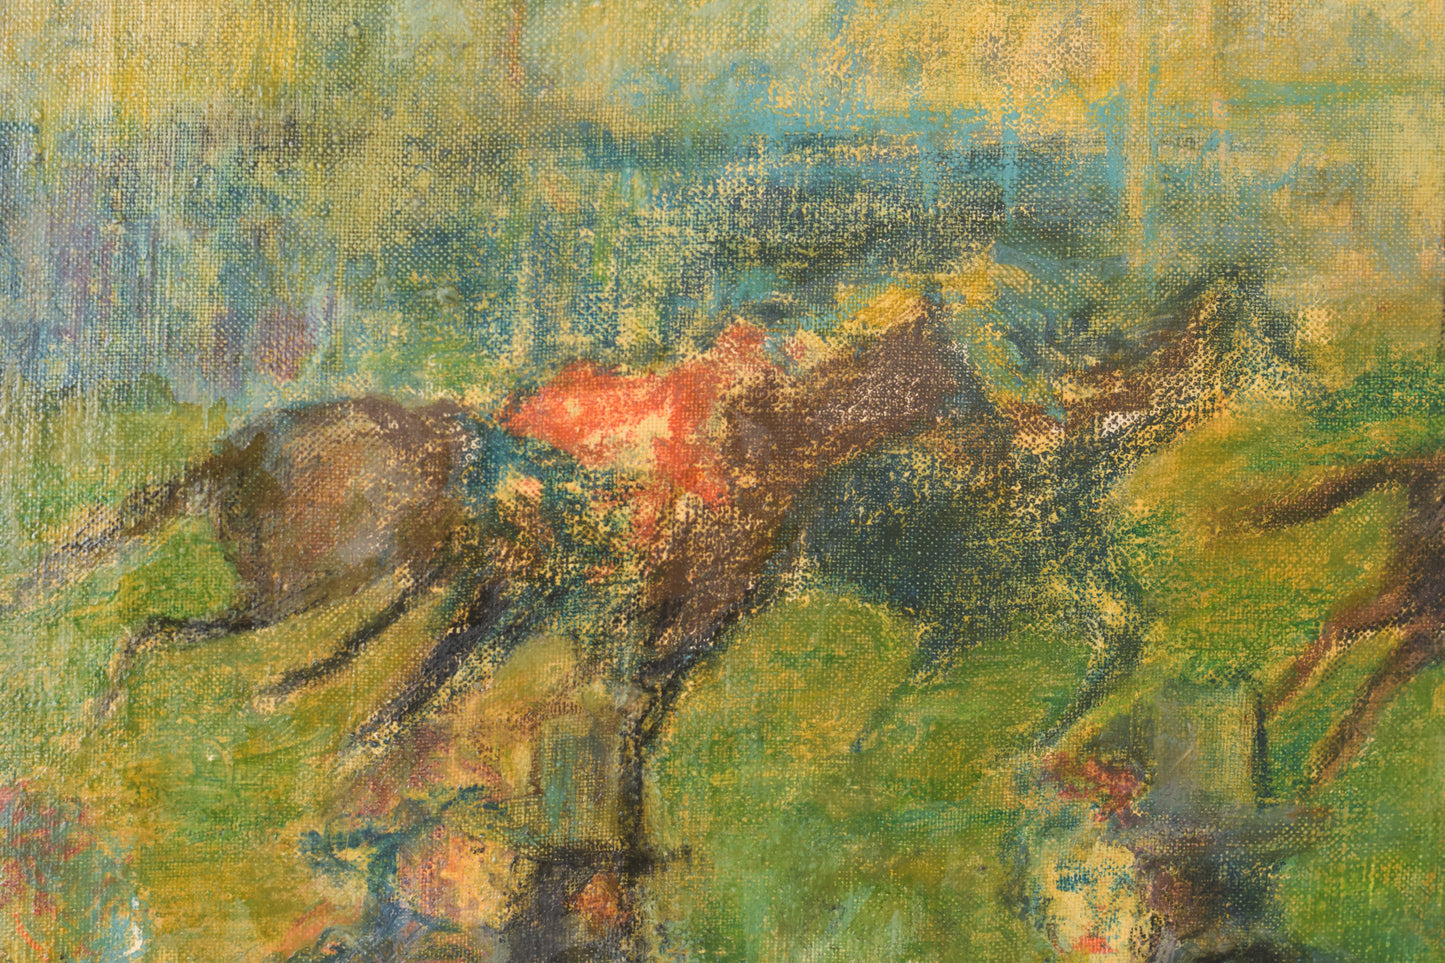 Impressionist Painting 'A Day at the Races'